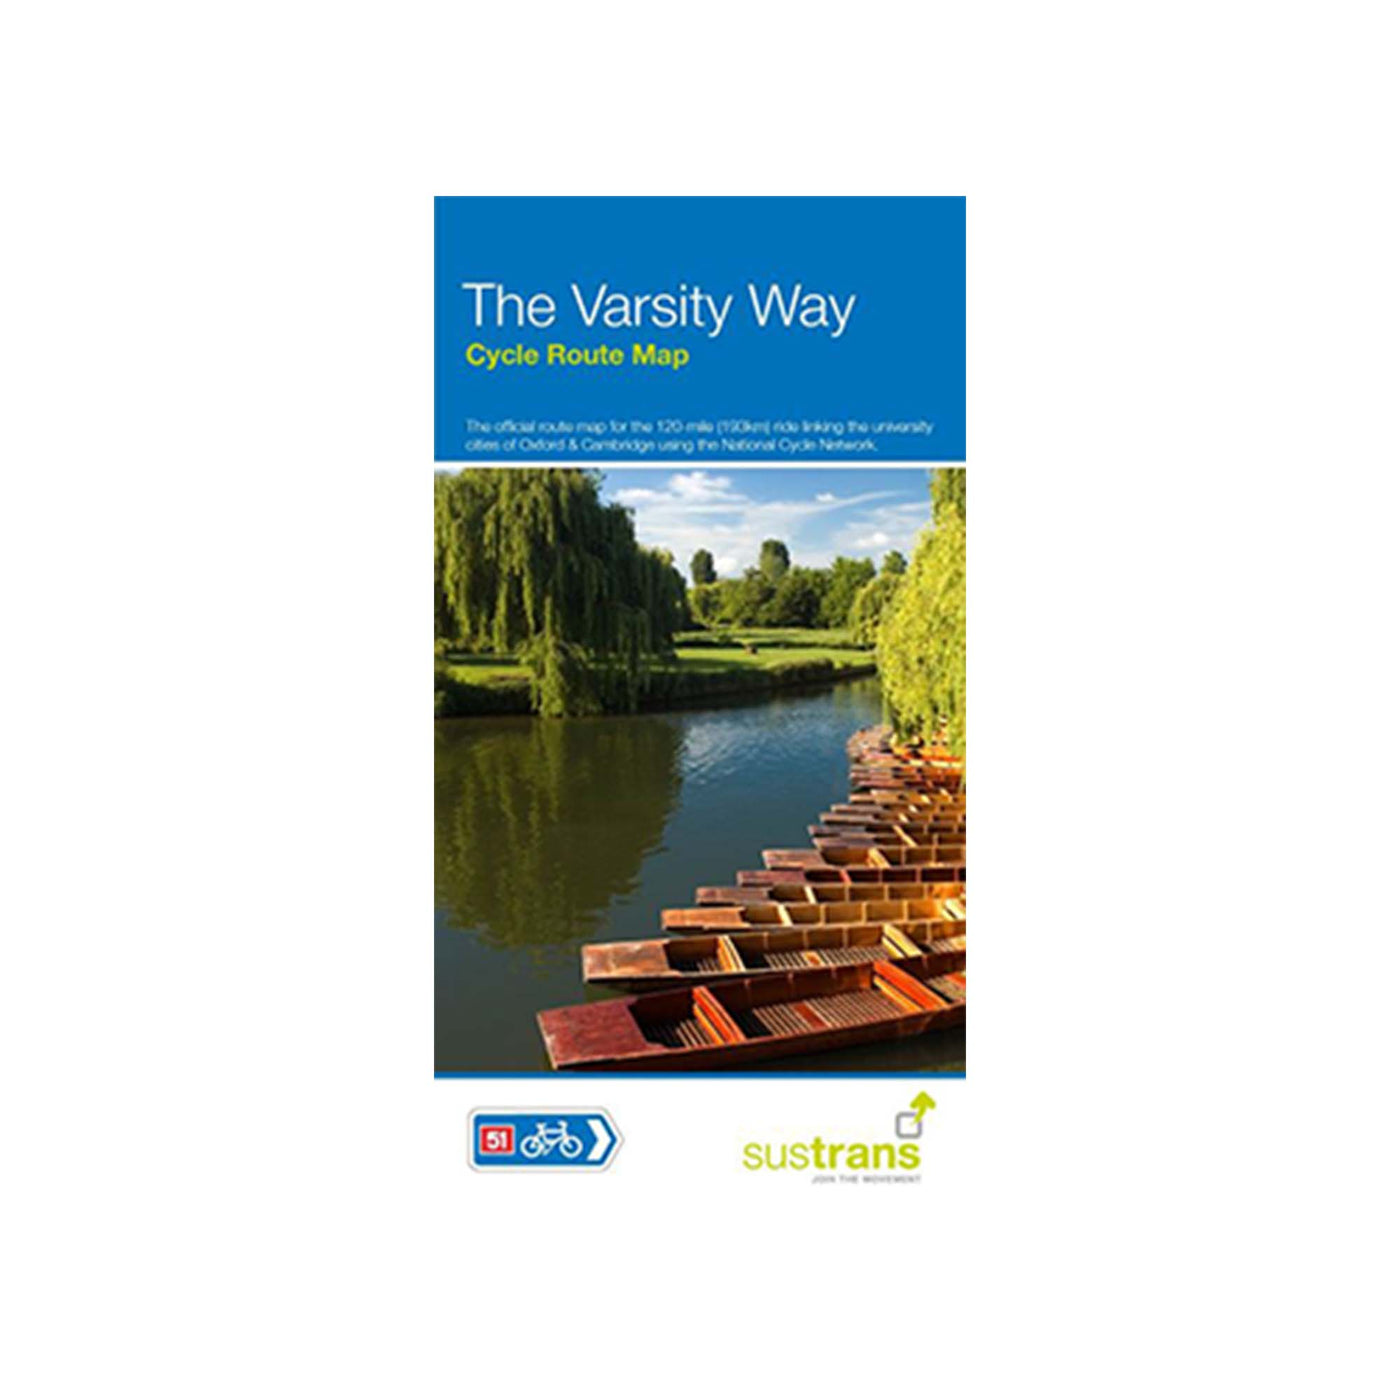 Cover for the Varsity Way cycle route map. The official route map for the 120-mile (193km) ride linking the university cities of Oxford and Cambridge using the National Cycle Network